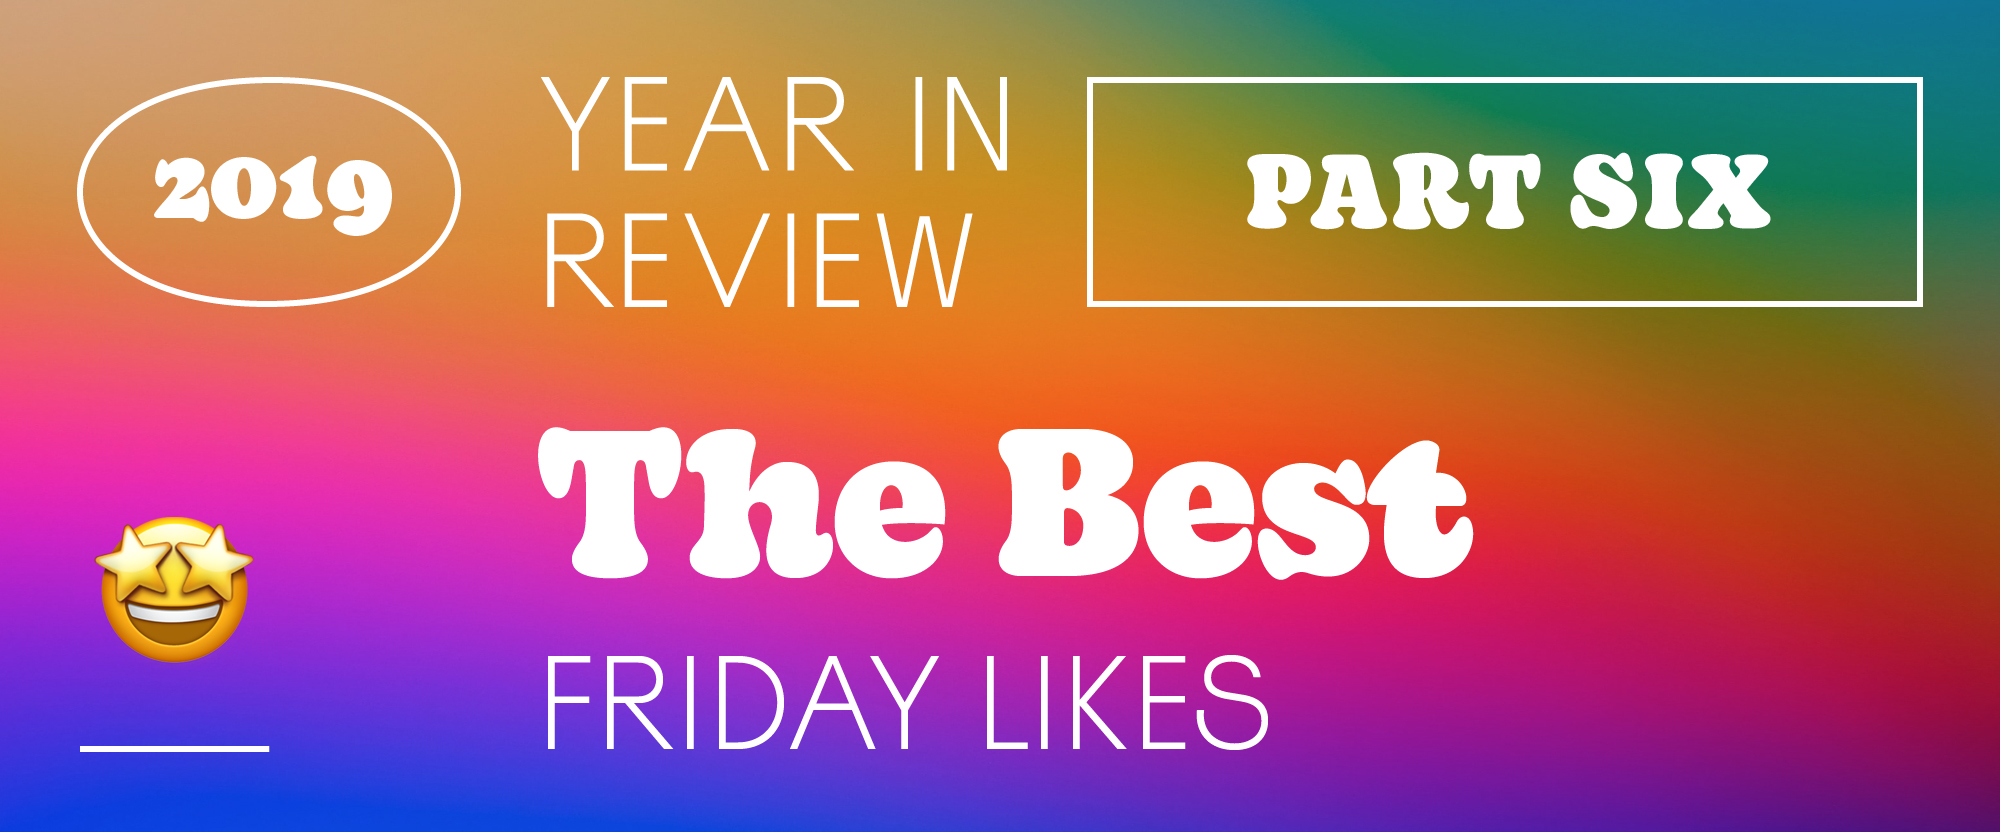 The Best and Worst Identities of 2019, Part 6: The Best Friday Likes